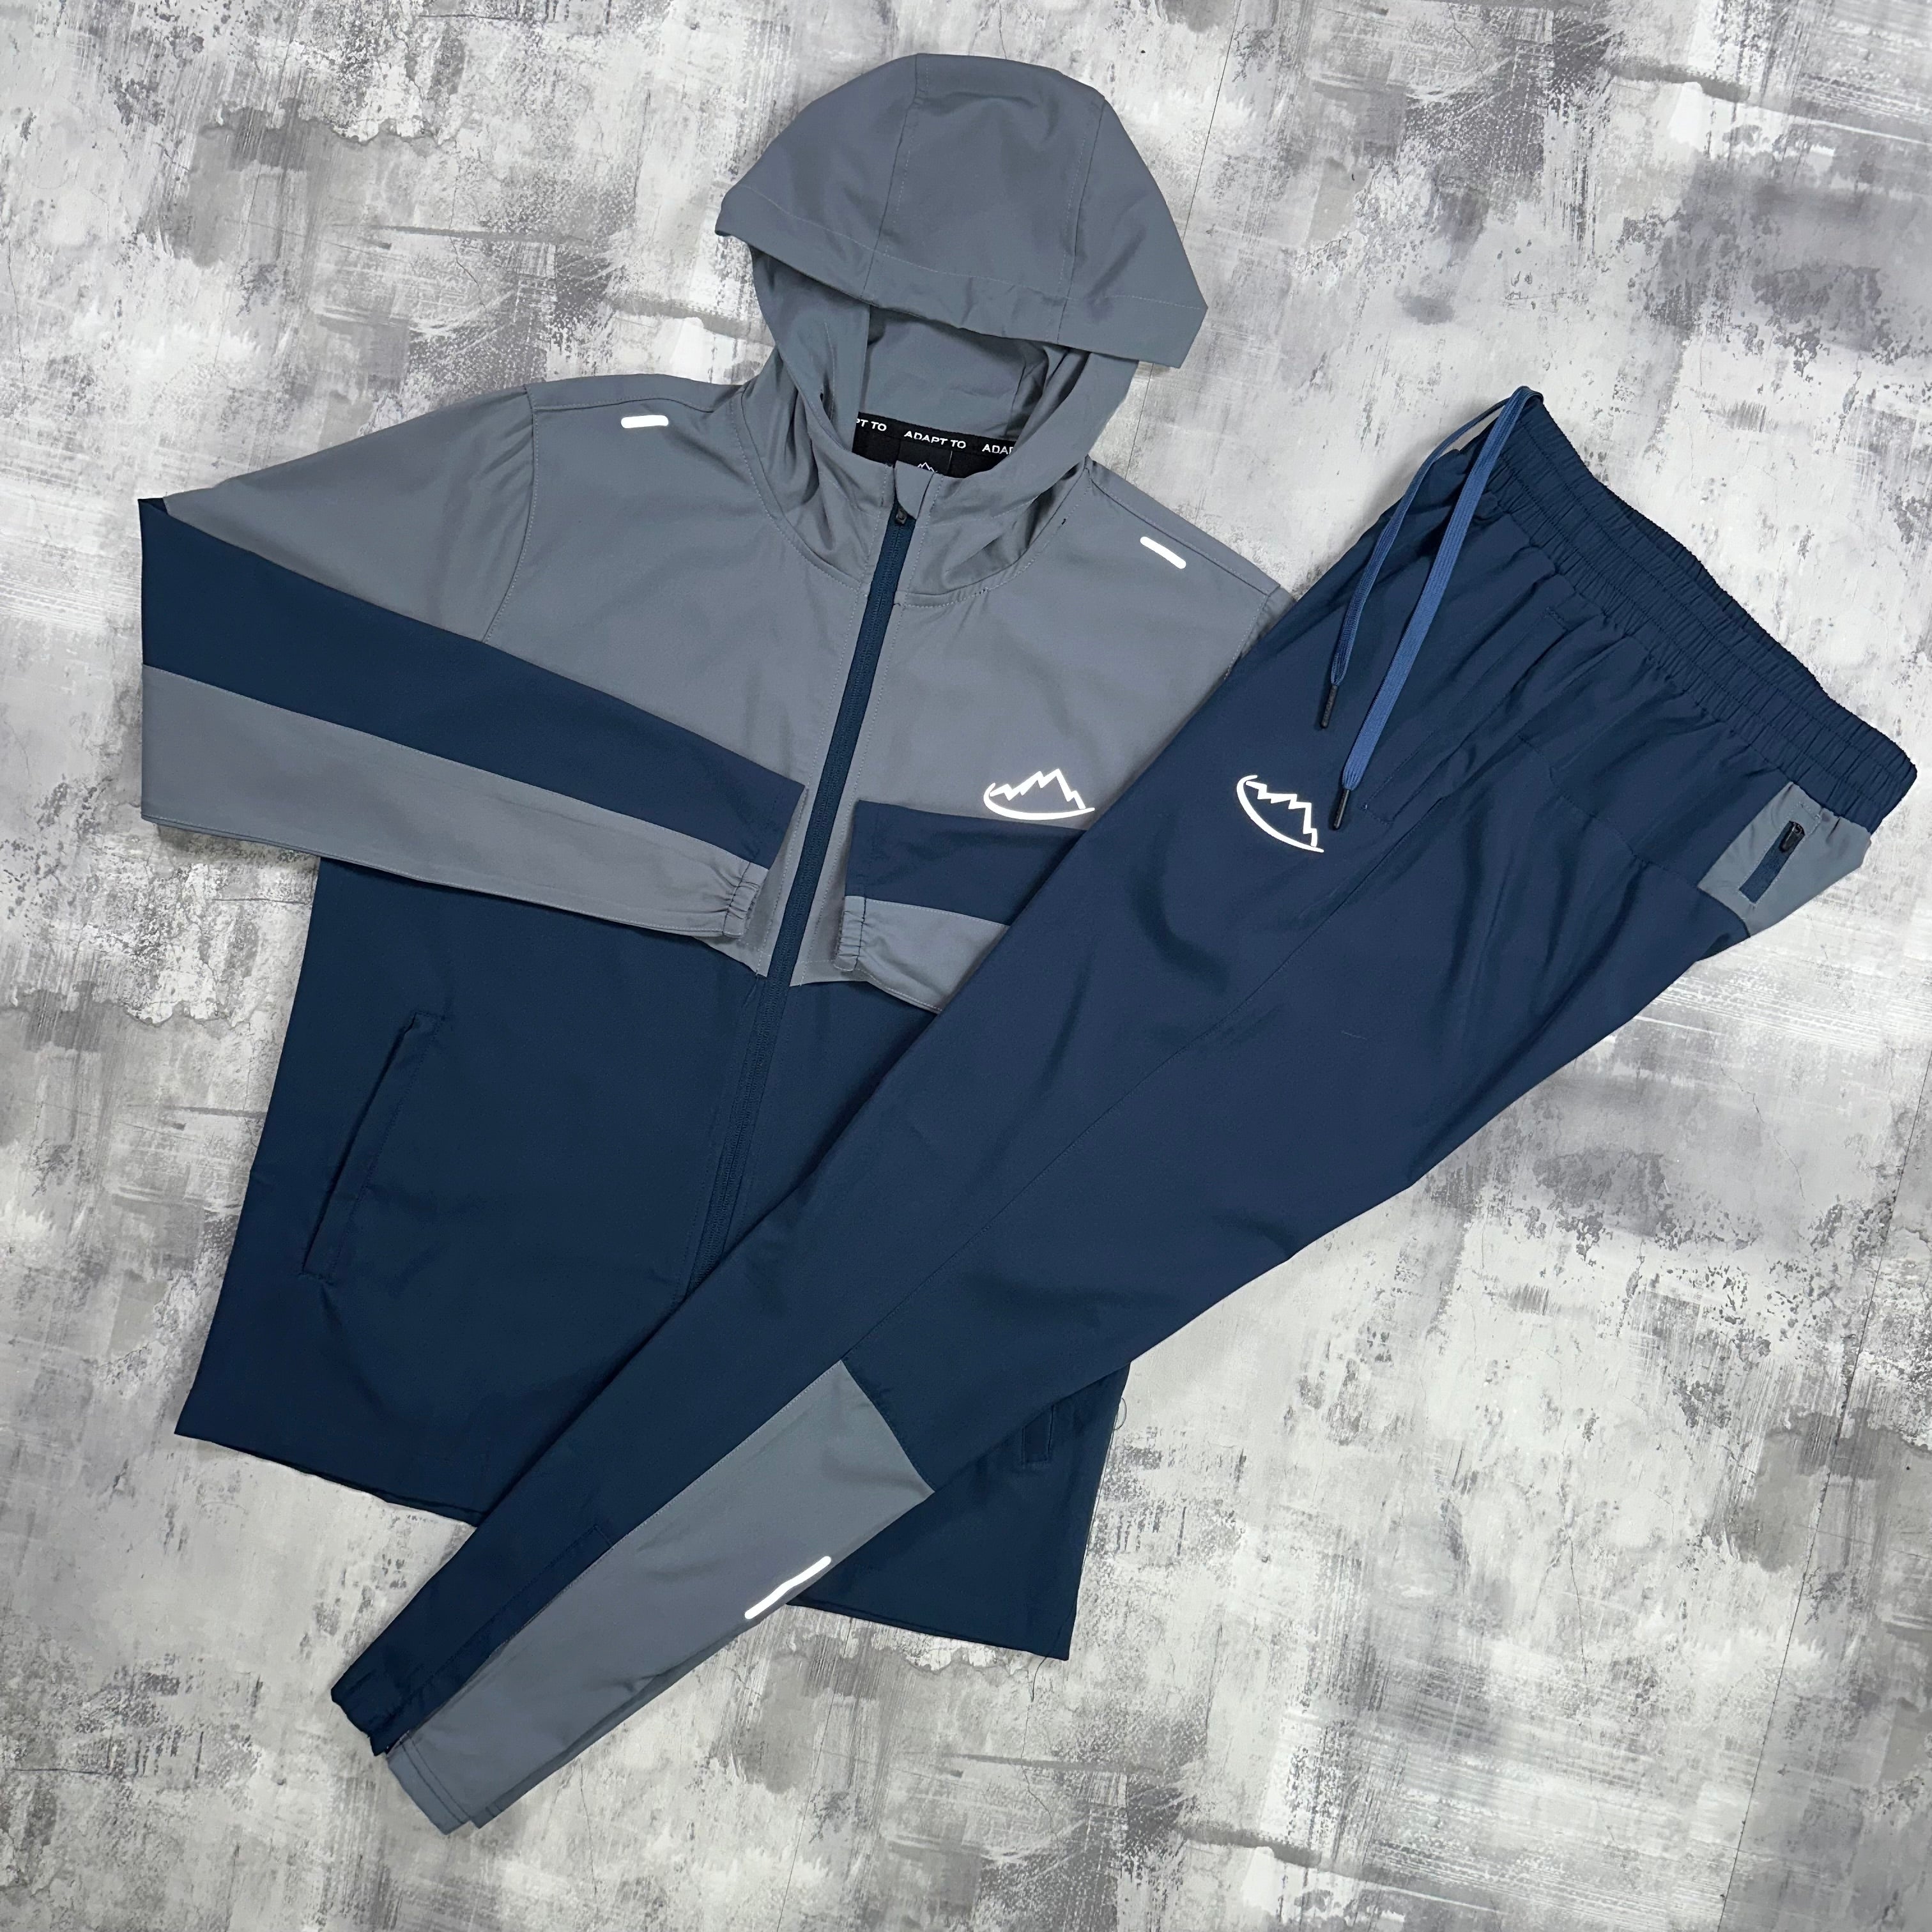 Adapt To Running 2.0 Set Navy / Grey - Jacket & Trousers